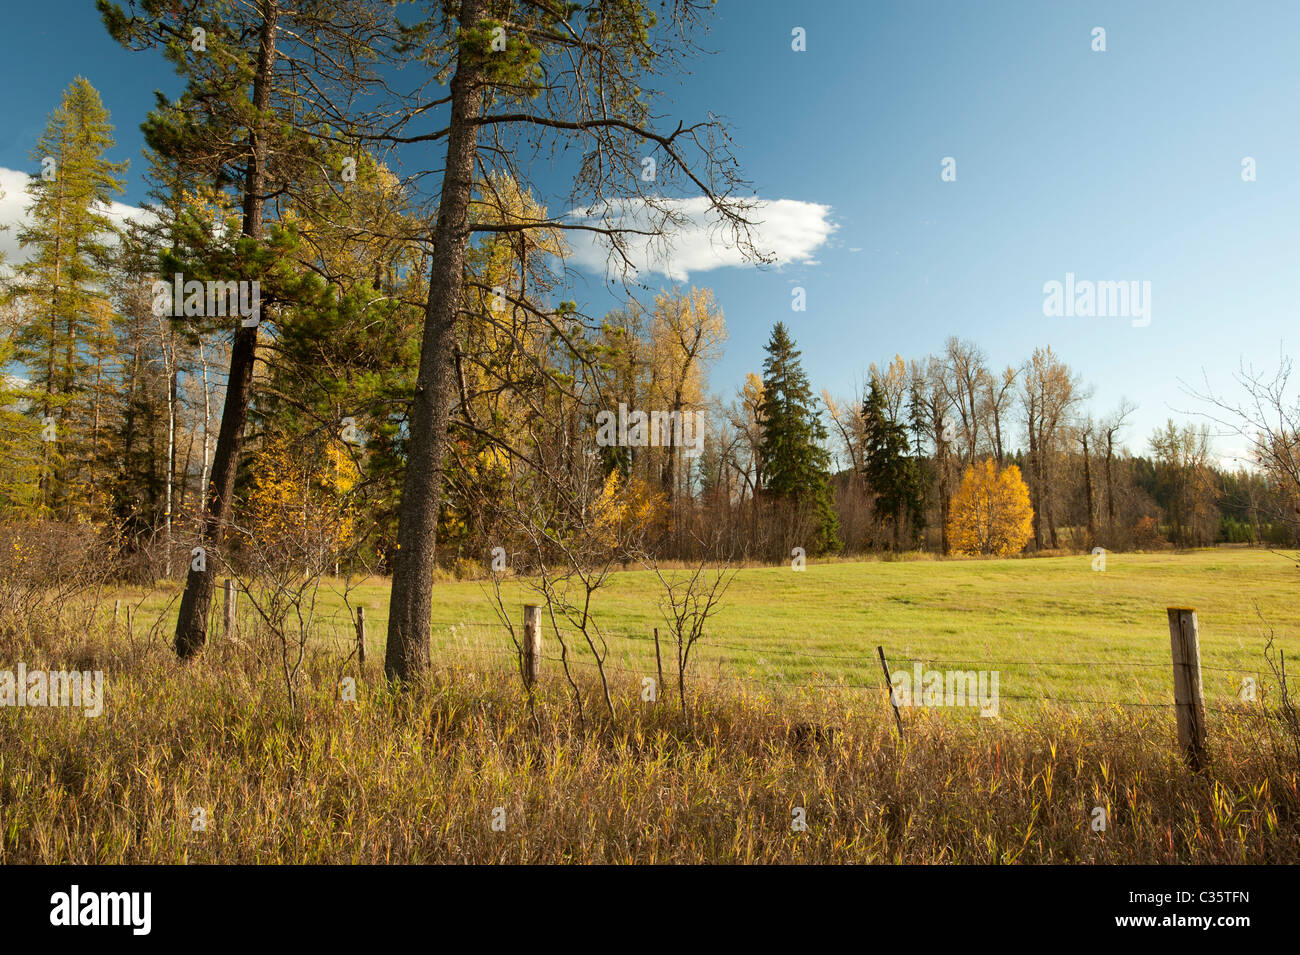 Branch of trees and grass in the fall colours Stock Photo